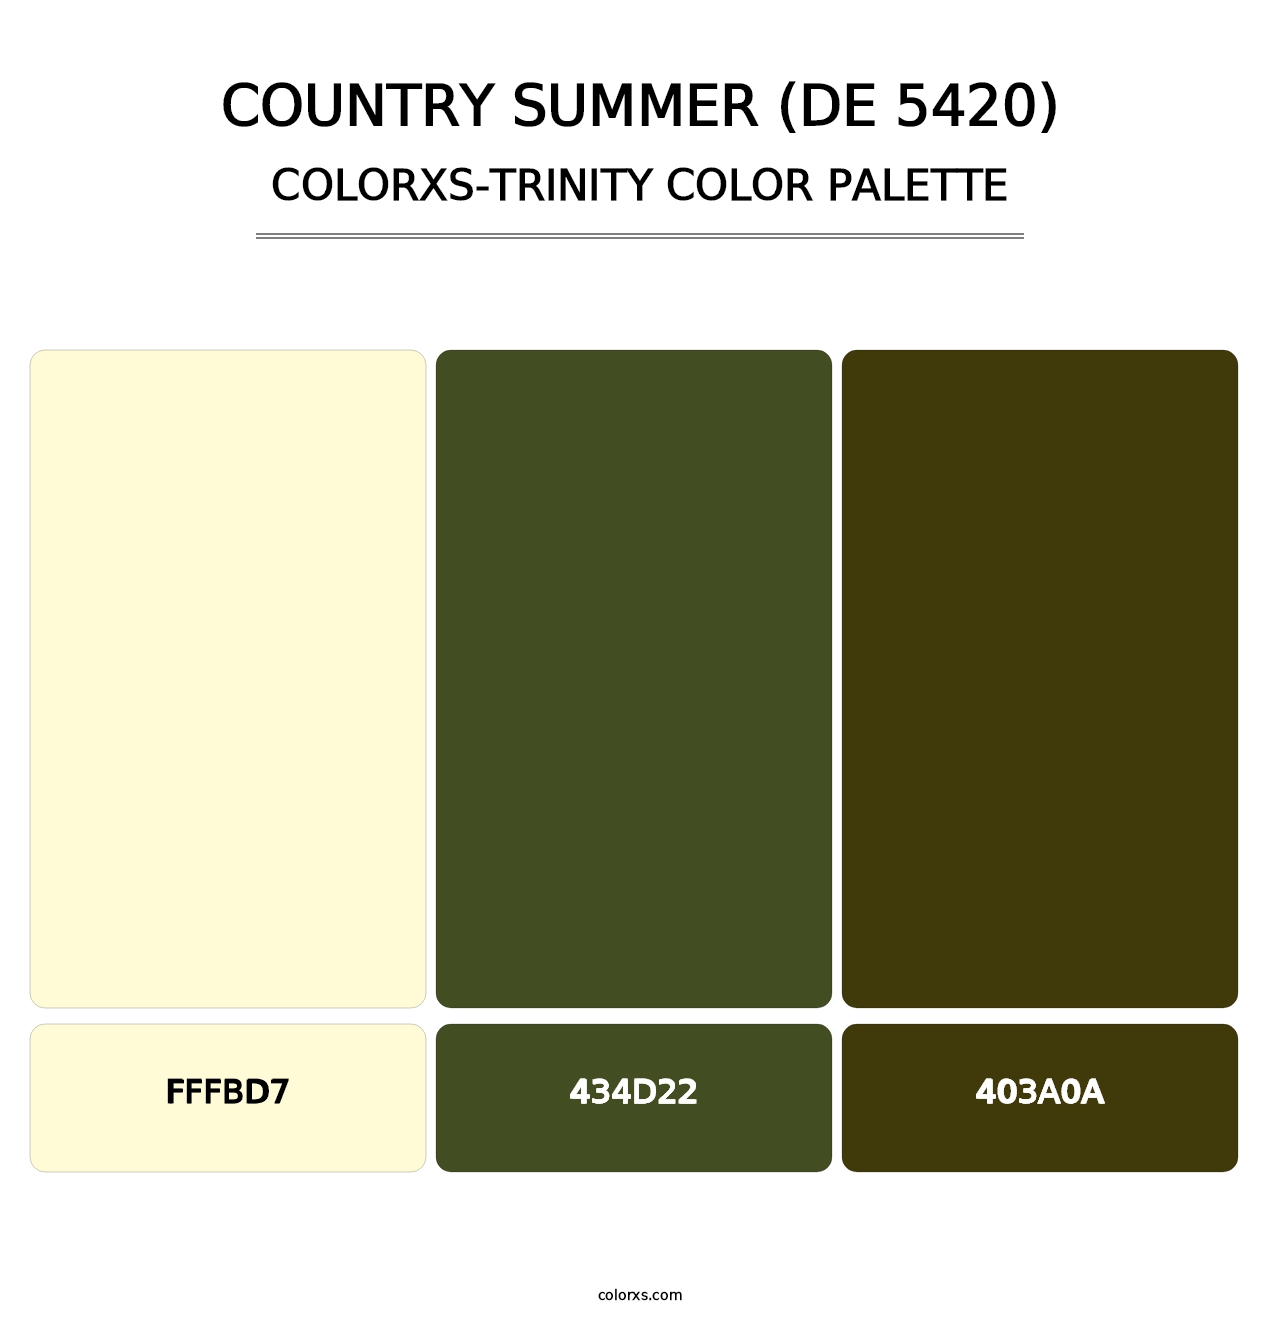 Country Summer (DE 5420) - Colorxs Trinity Palette